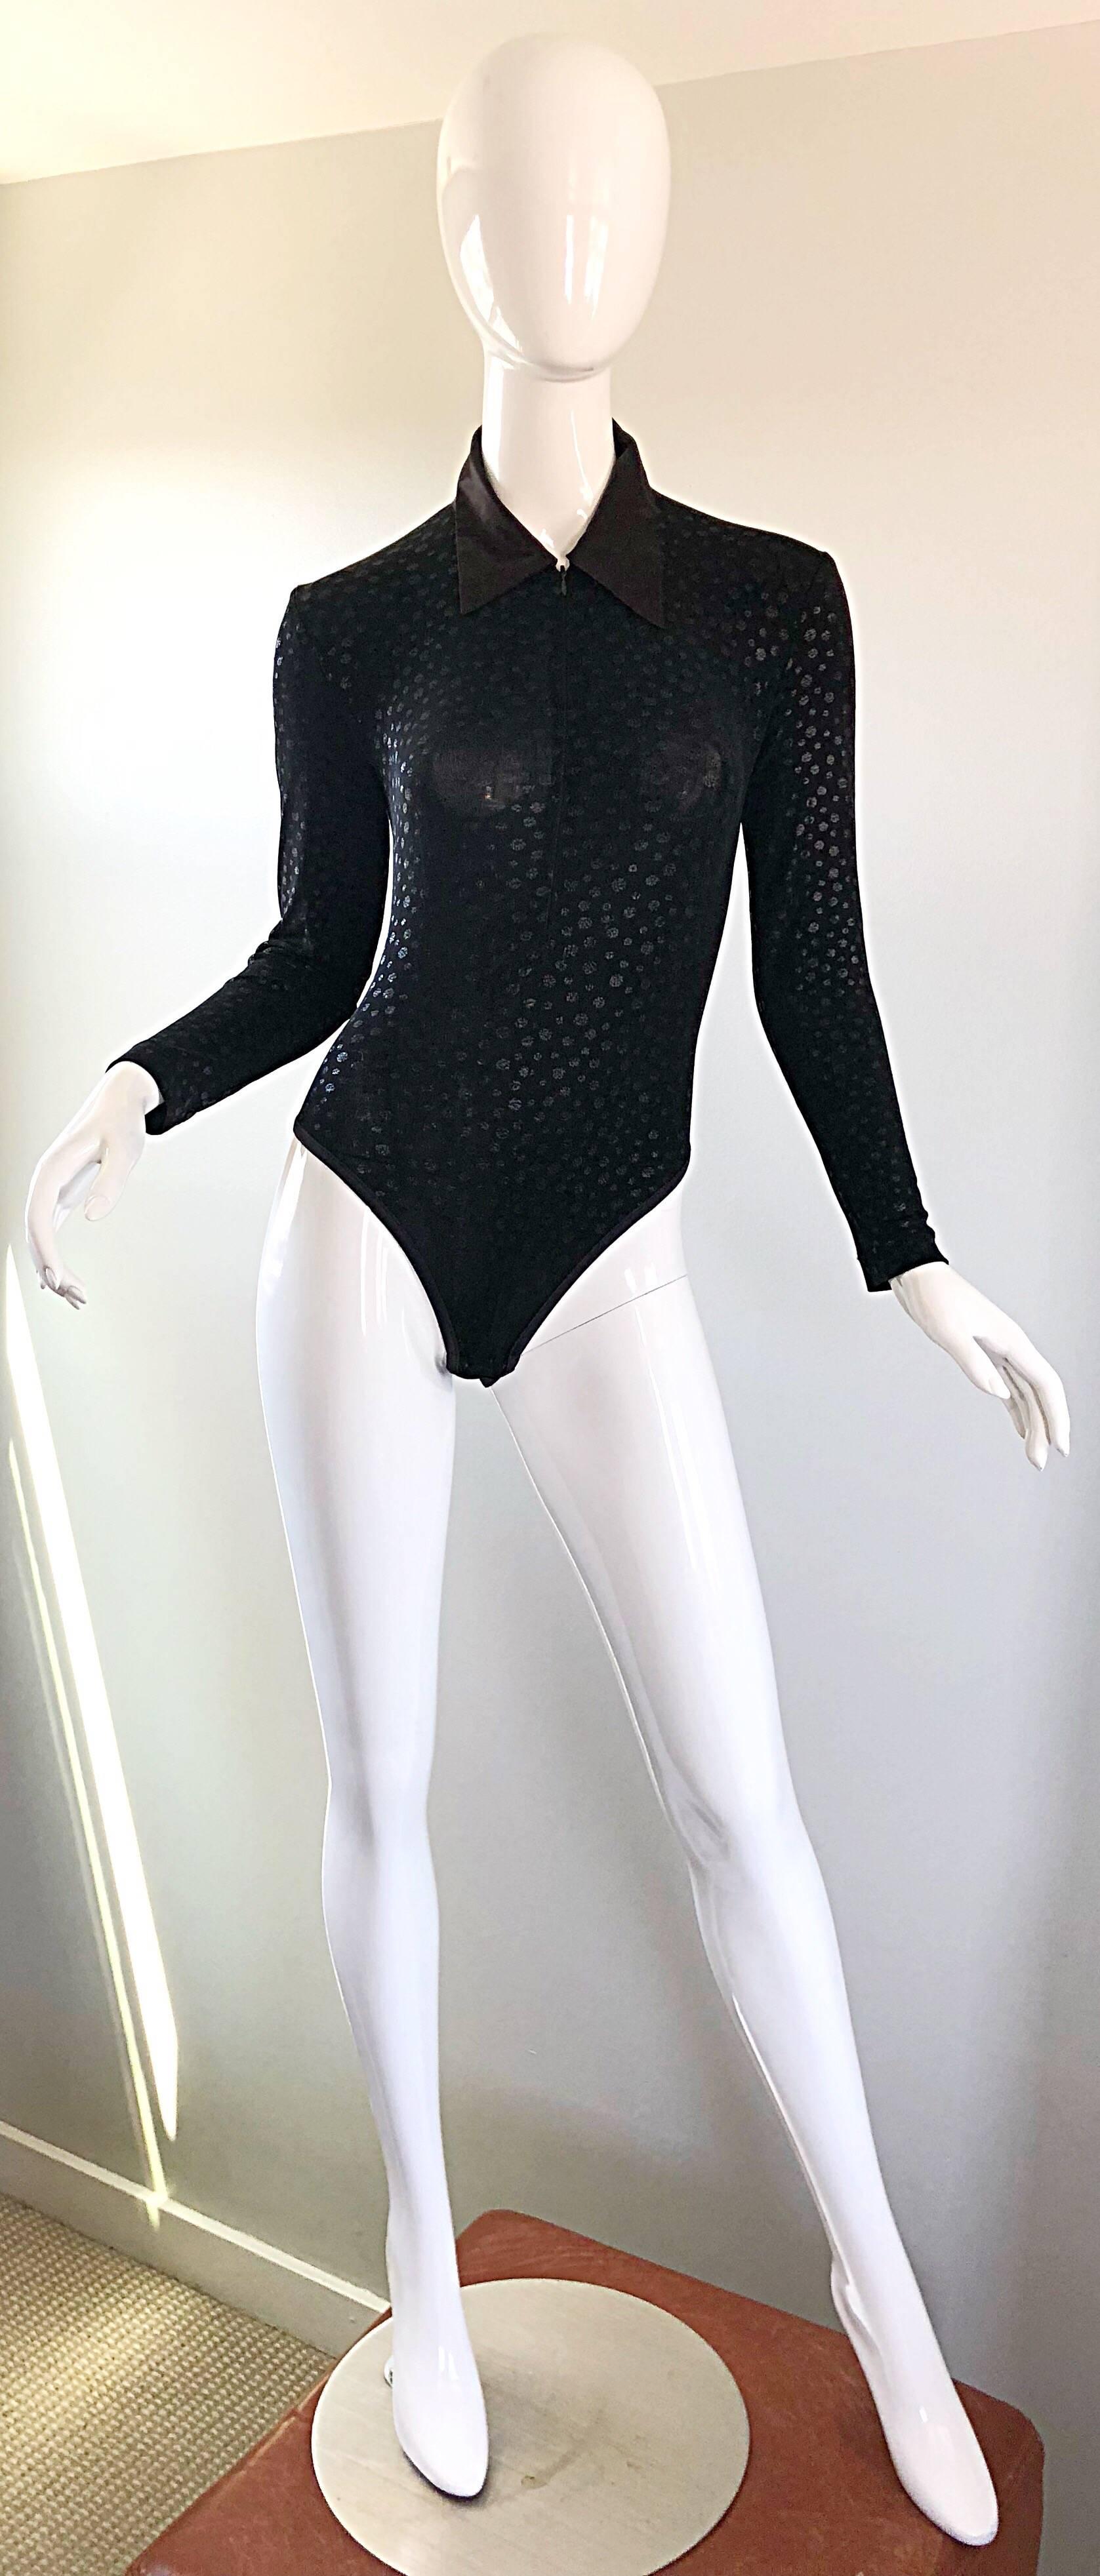 Sexy 90s MY MAILLE, of Paris, France black iridescent metallic long sleeve zipper bodysuit! Features a soft stretchy viscose material that stretches to fit. Full zipper up the front allows to control cleavage. Great with shorts, jeans, or a skirt.